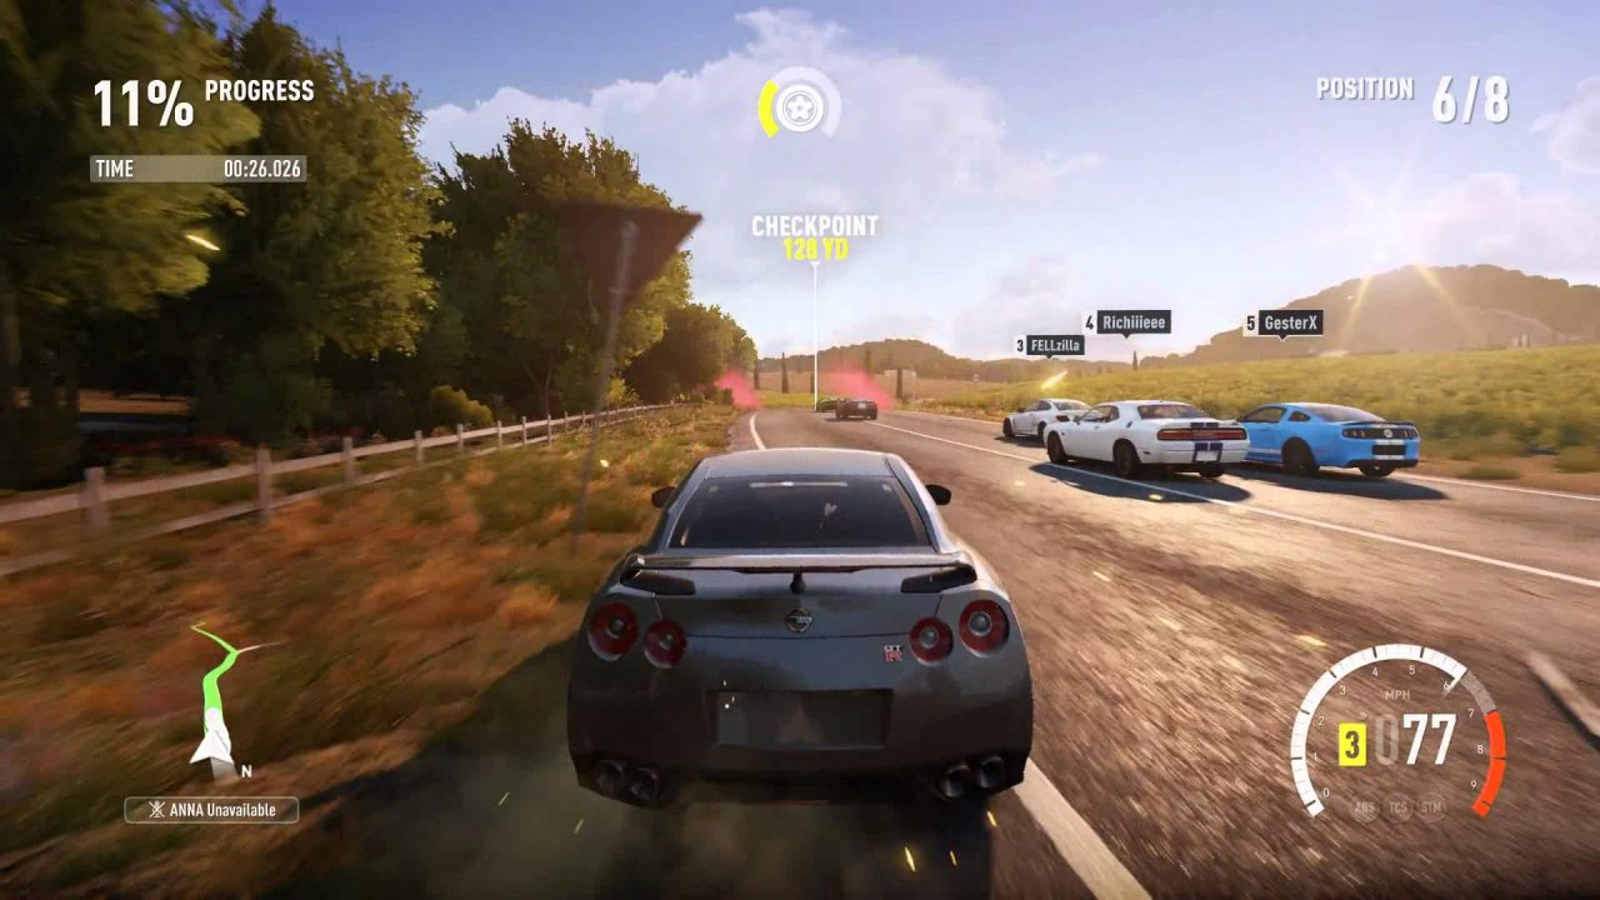 No Forza Horizon 2 DLC planned for Xbox 360 - The Tech Game